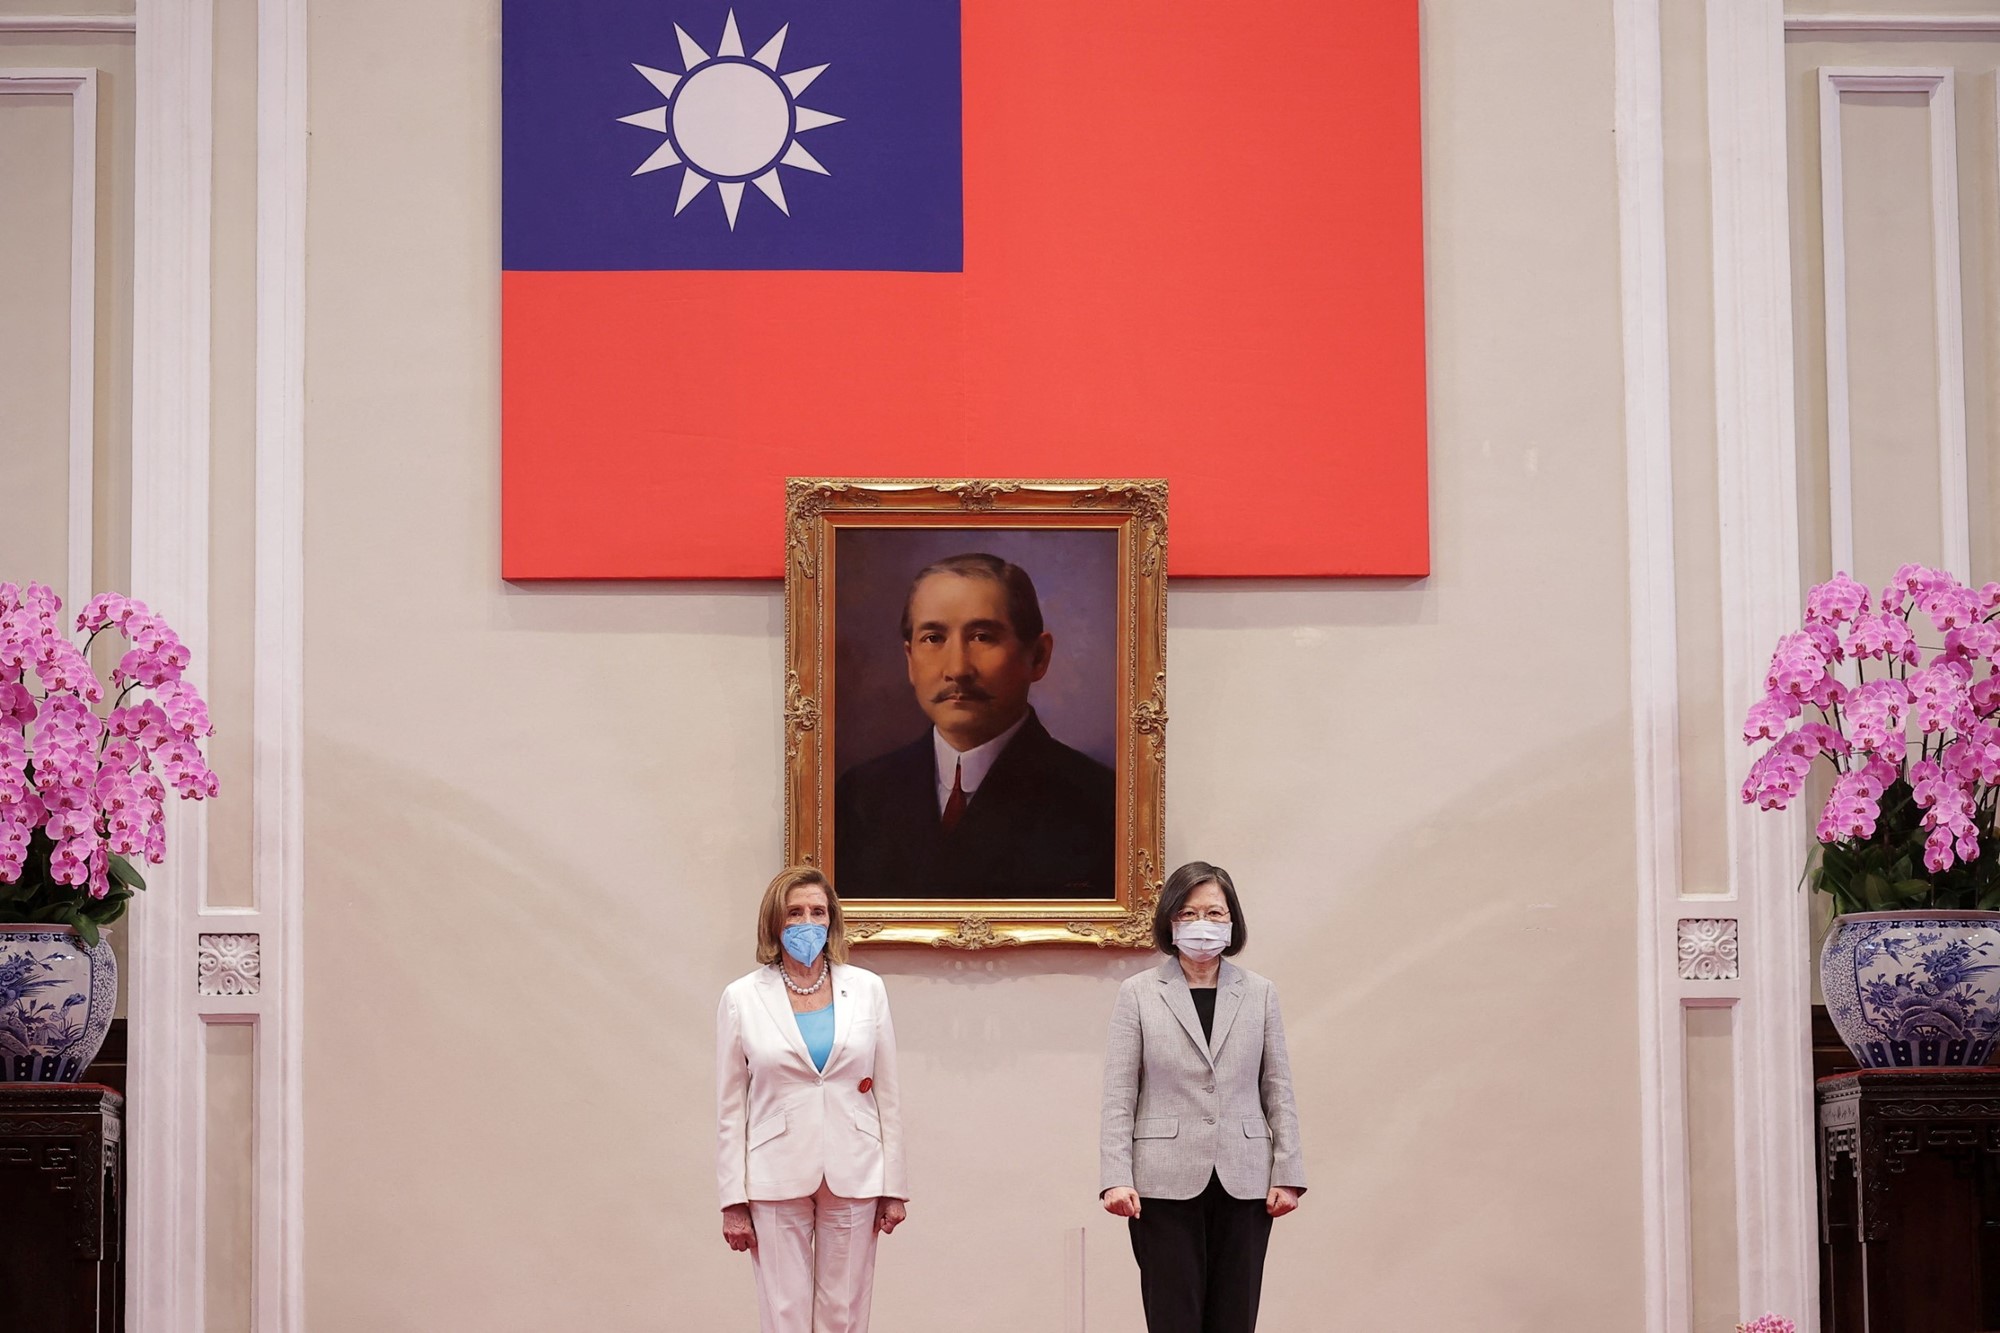 Two women wearing suits stand in front of a portrait and flag.